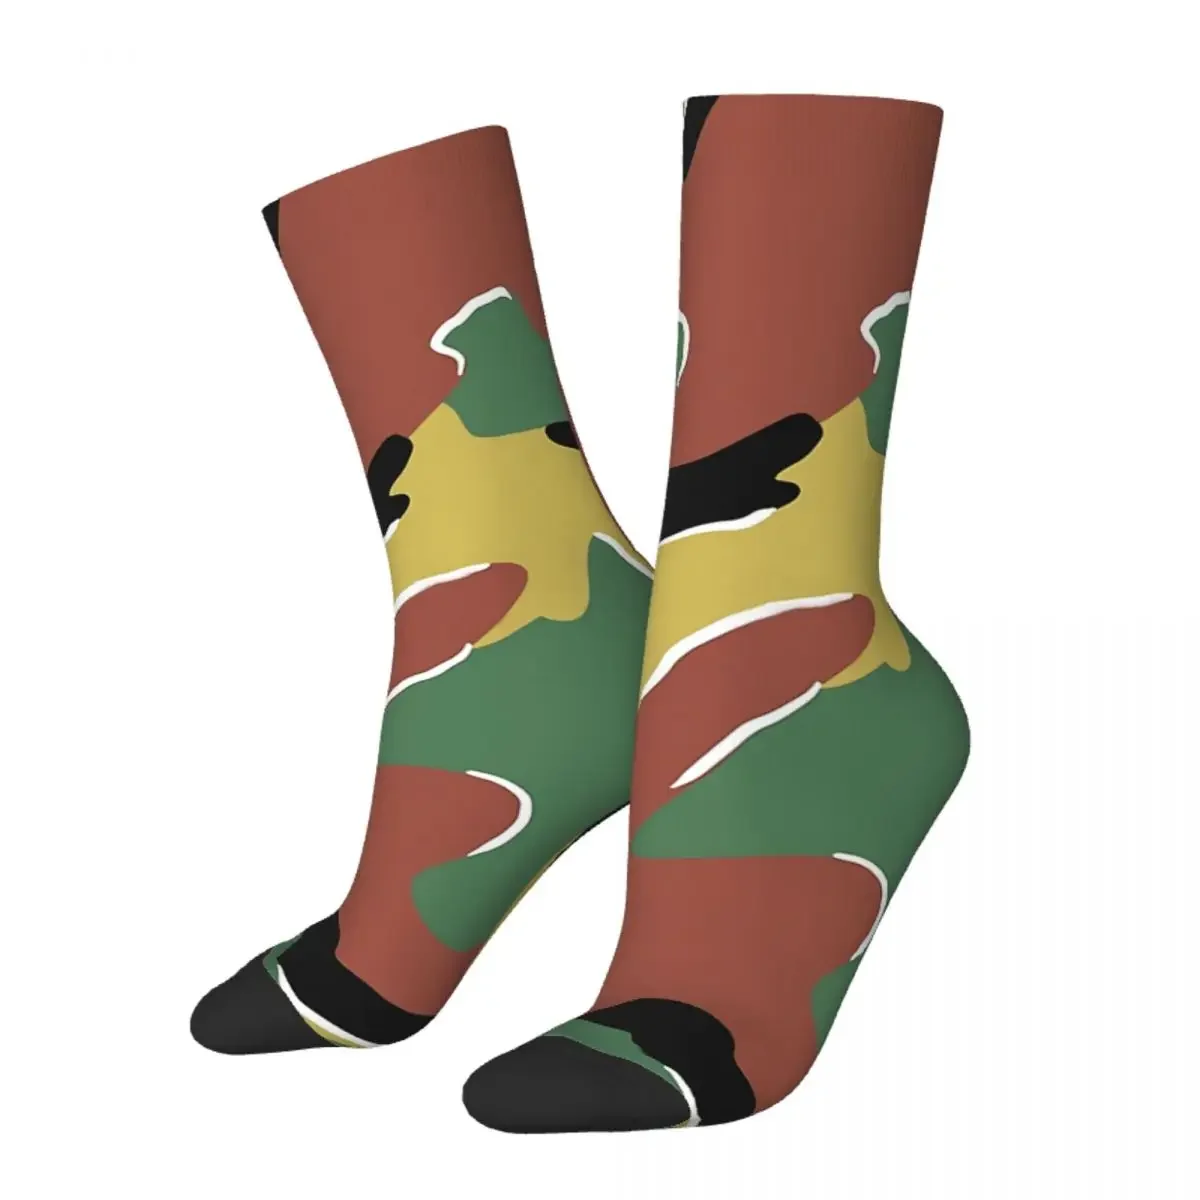 

Funny Crazy Sock for Men Belgian Jigsaw Camouflage Army Hip Hop Vintage Seamless Pattern Printed Boys Crew Sock Casual Gift